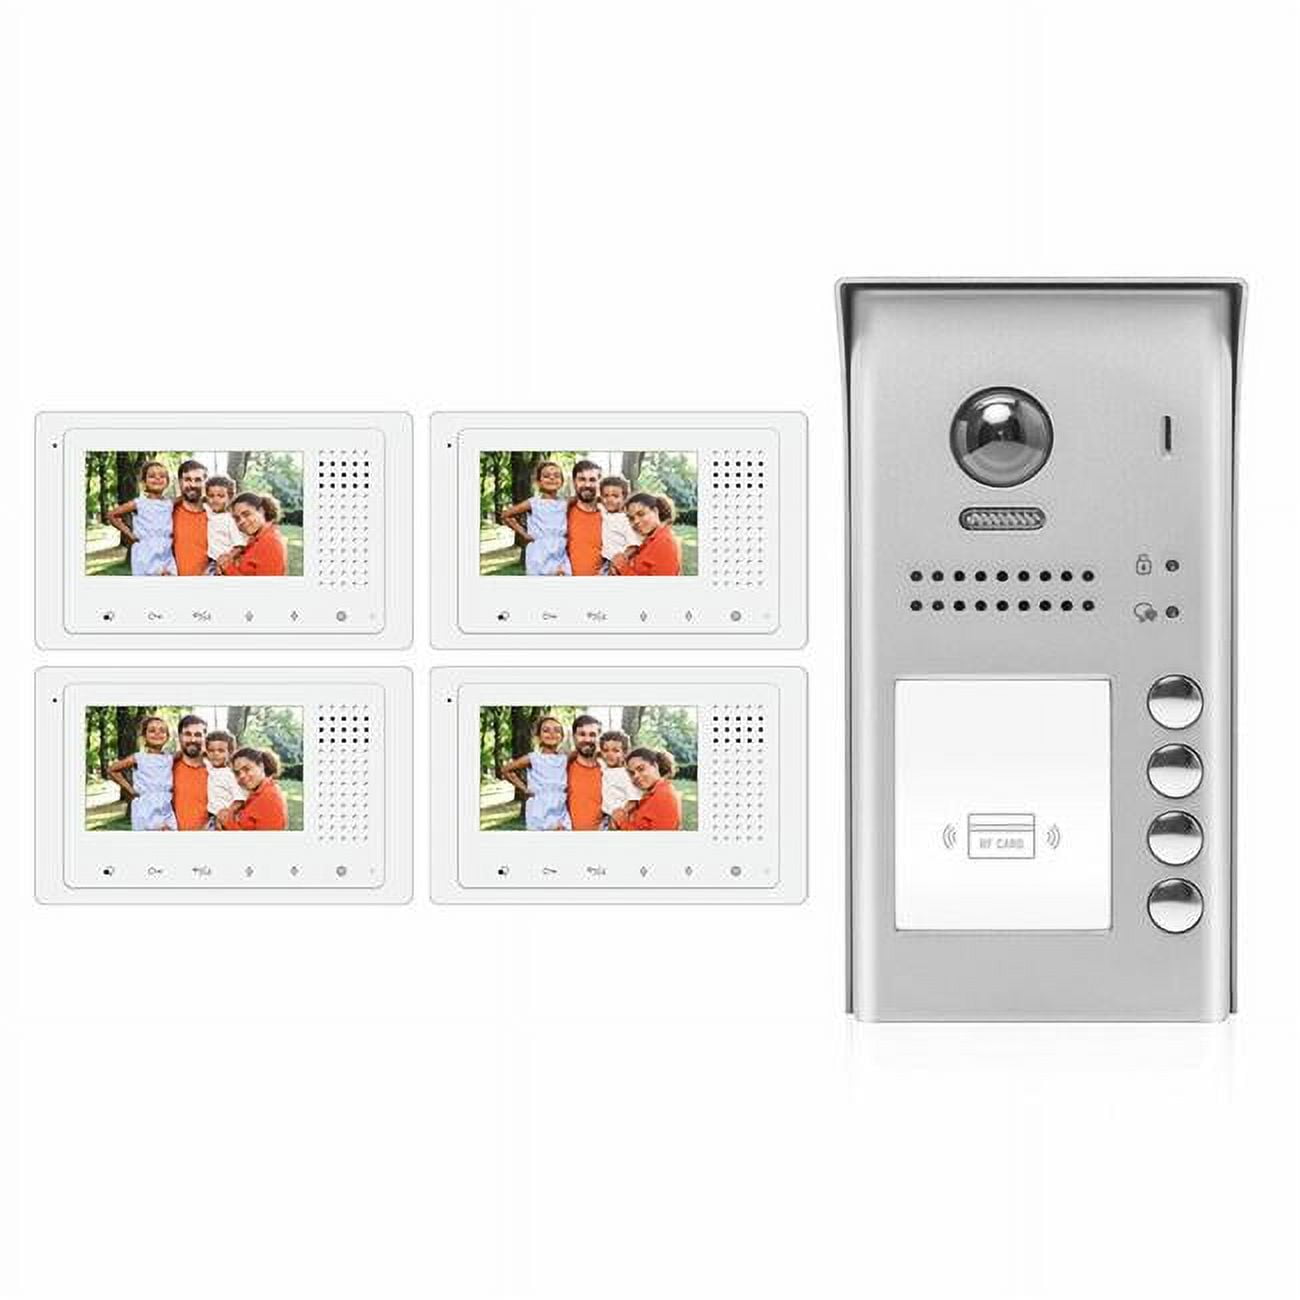 Picture of 2Easy Video Intercom System 1725-N 4.3 in. 2 Wire Audio & Video Doorbell Intercom System Entry Monitor Kit - 4 Apartment with 4 Color